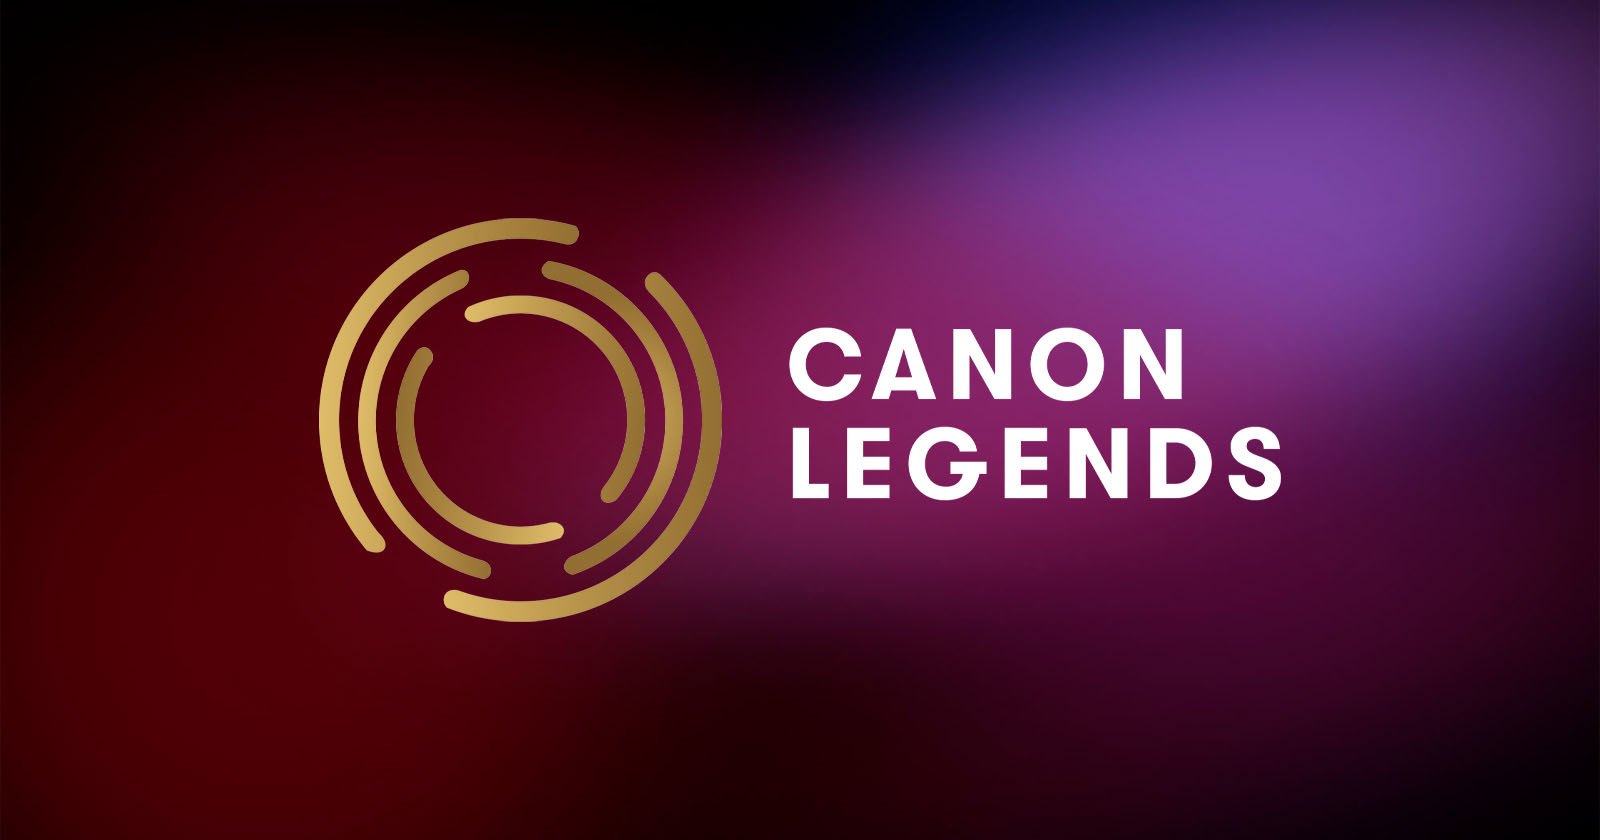  canon legends photographers are selling photos nfts 